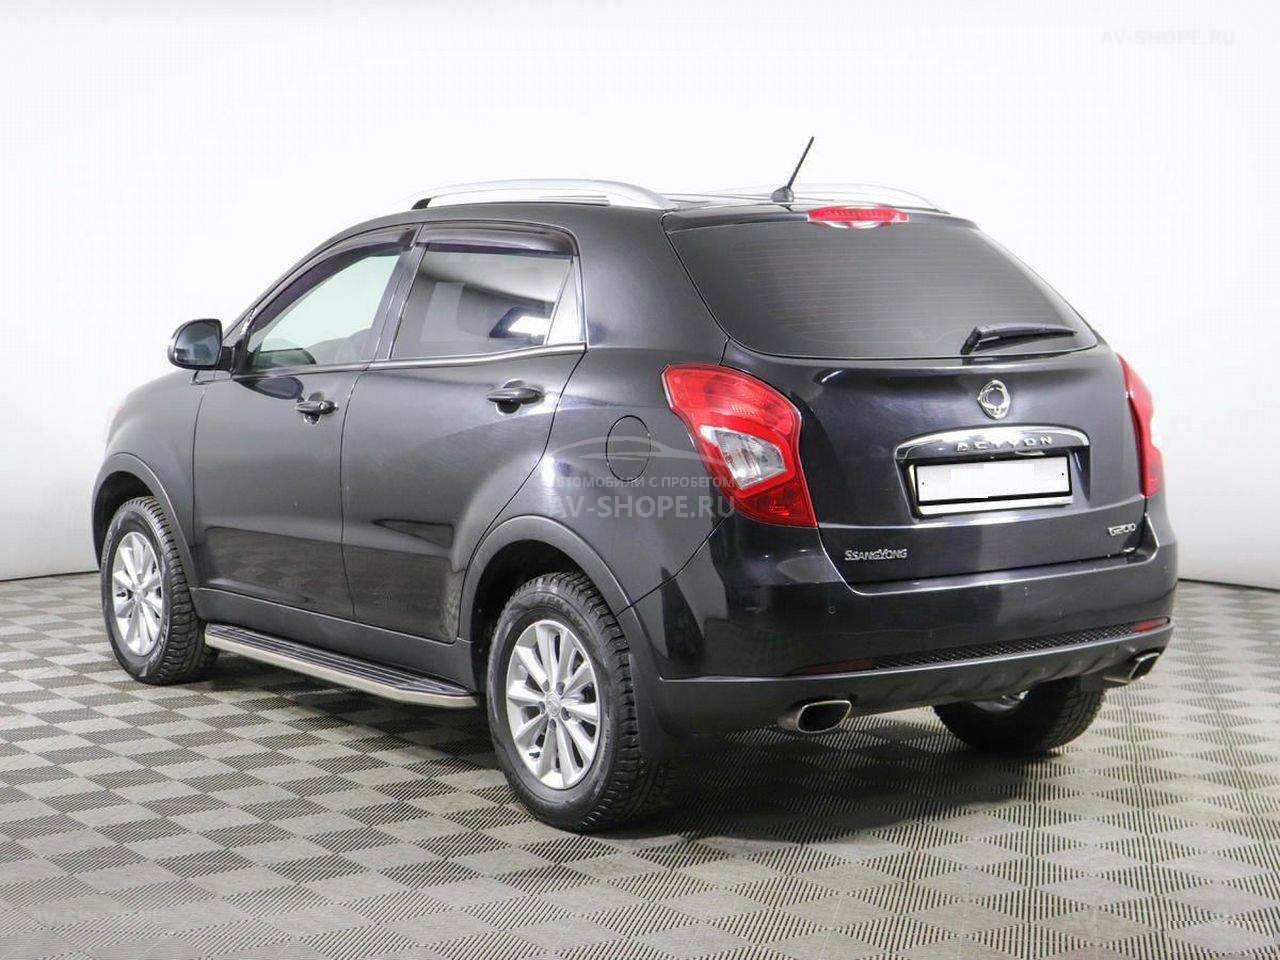 New actyon 2014. SSANGYONG Actyon 2014. Санг енг Актион 2. SSANGYONG Actyon New 2. SSANGYONG Actyon Actyon.